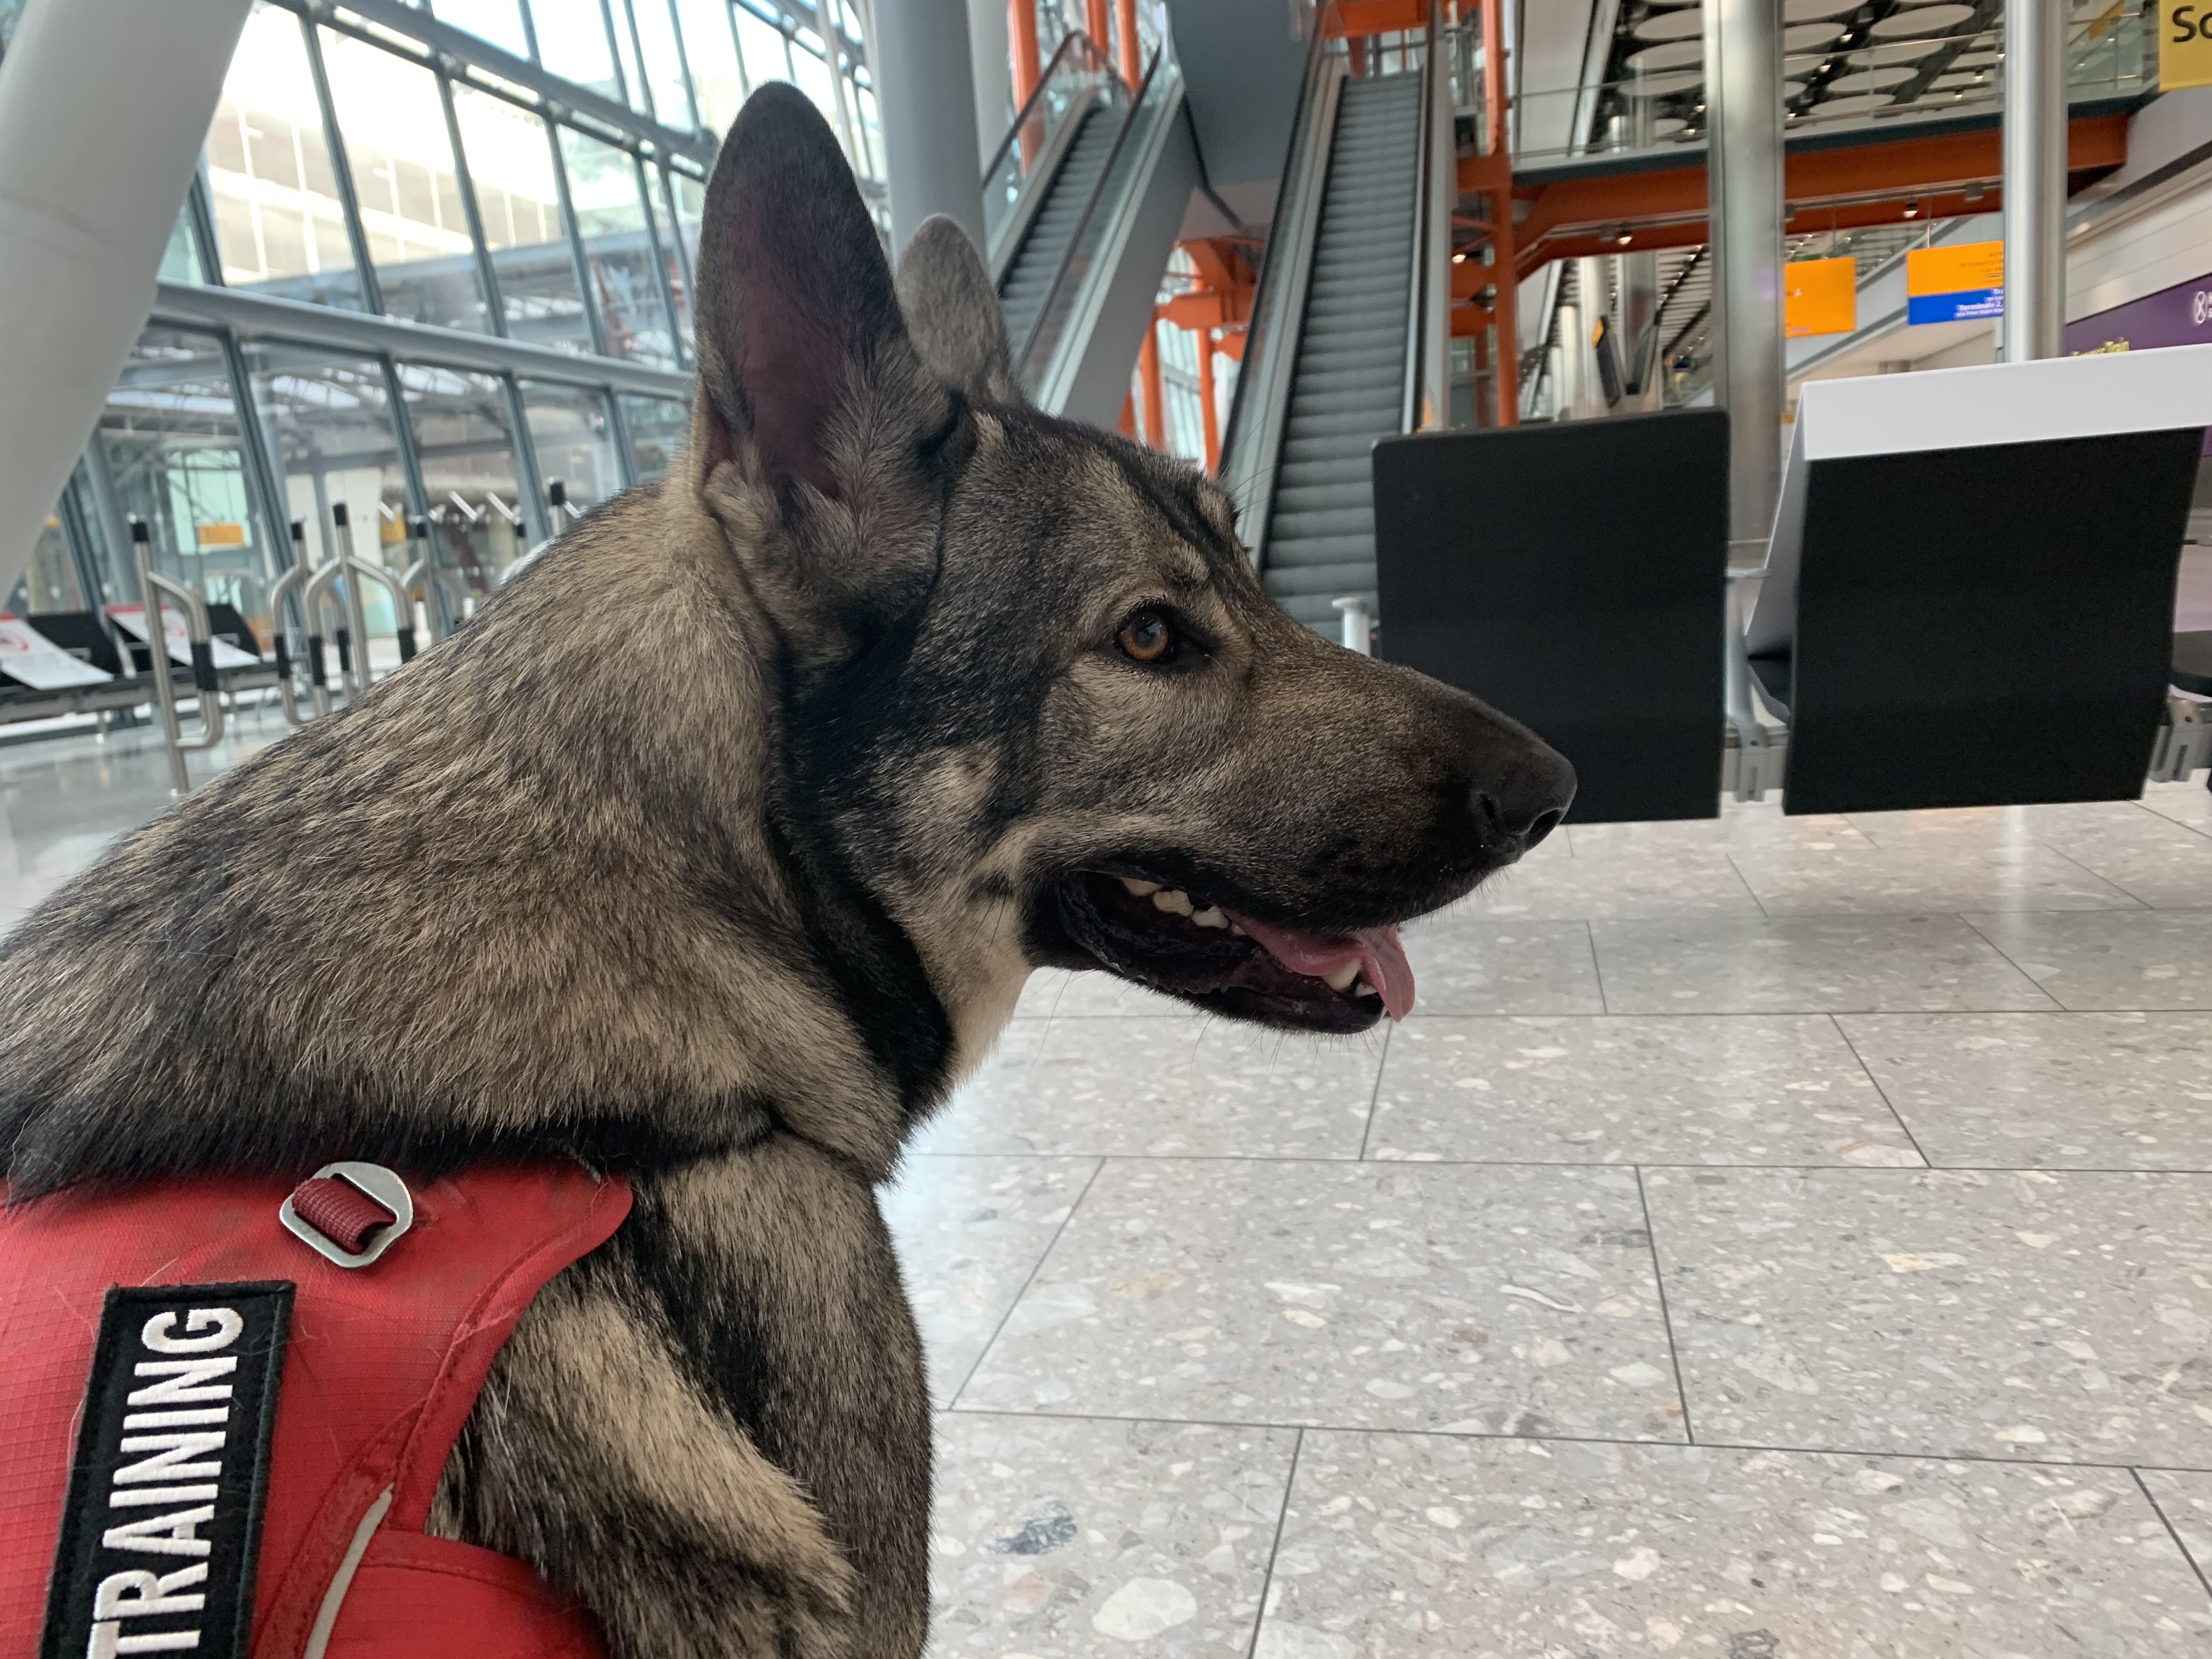 Indie at the airport ready for our international flight together